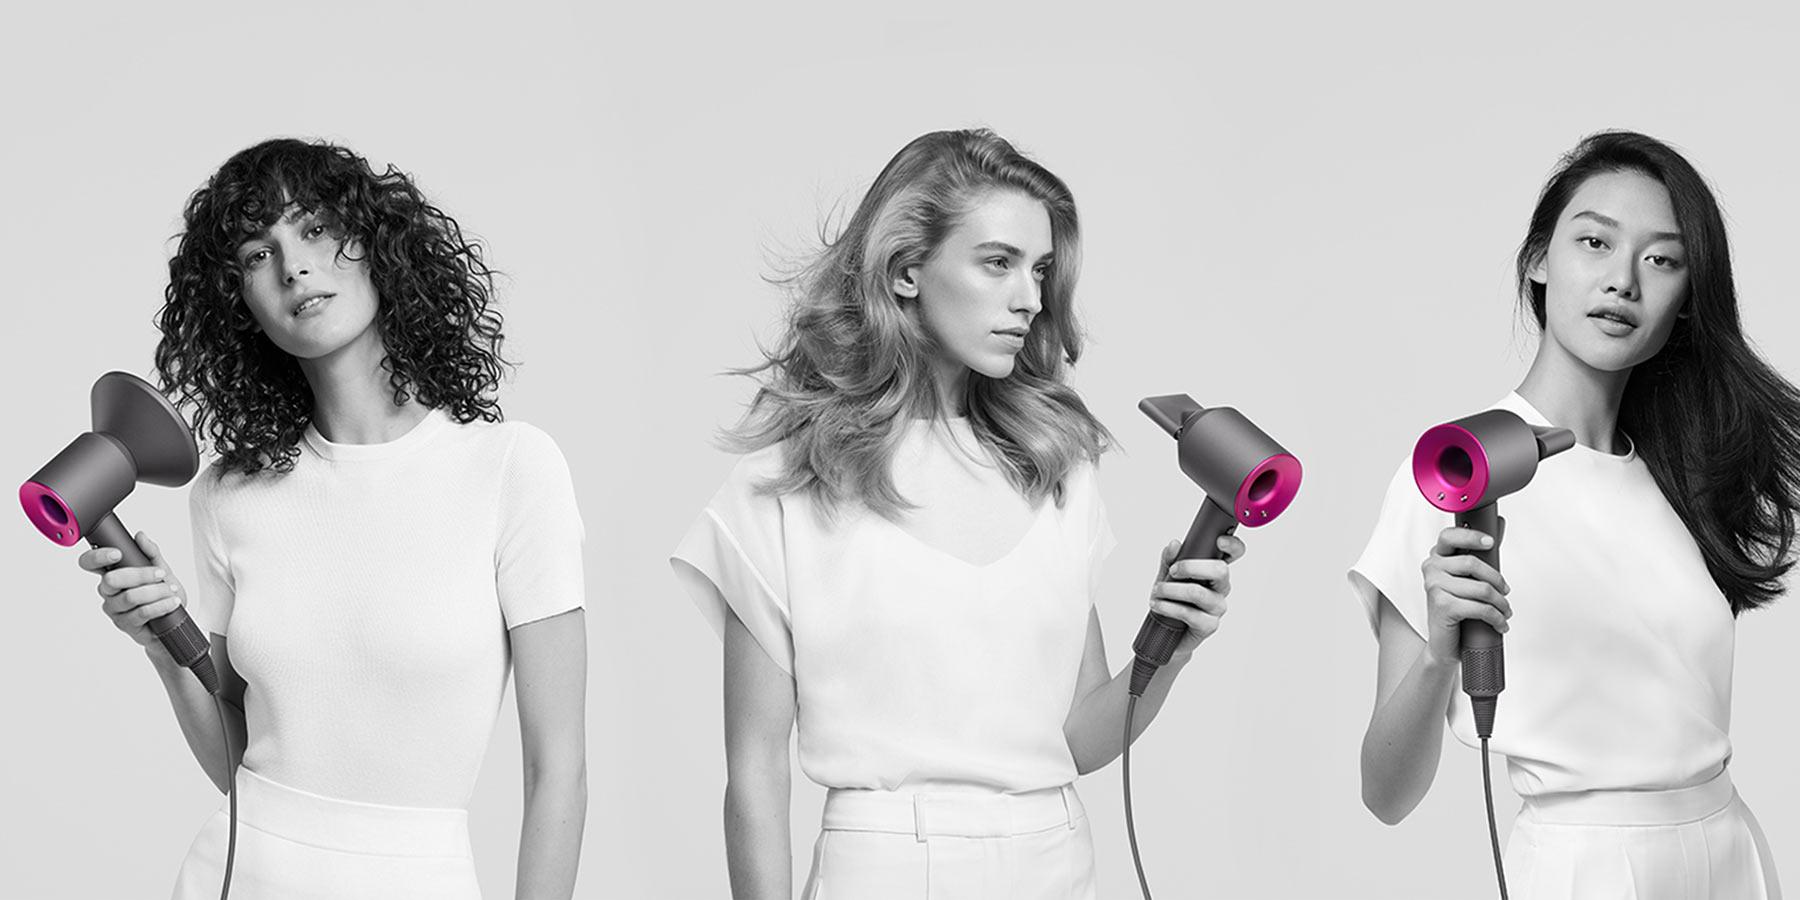 Complimentary Styling with Dyson Hair care January 13 - January 17 2019